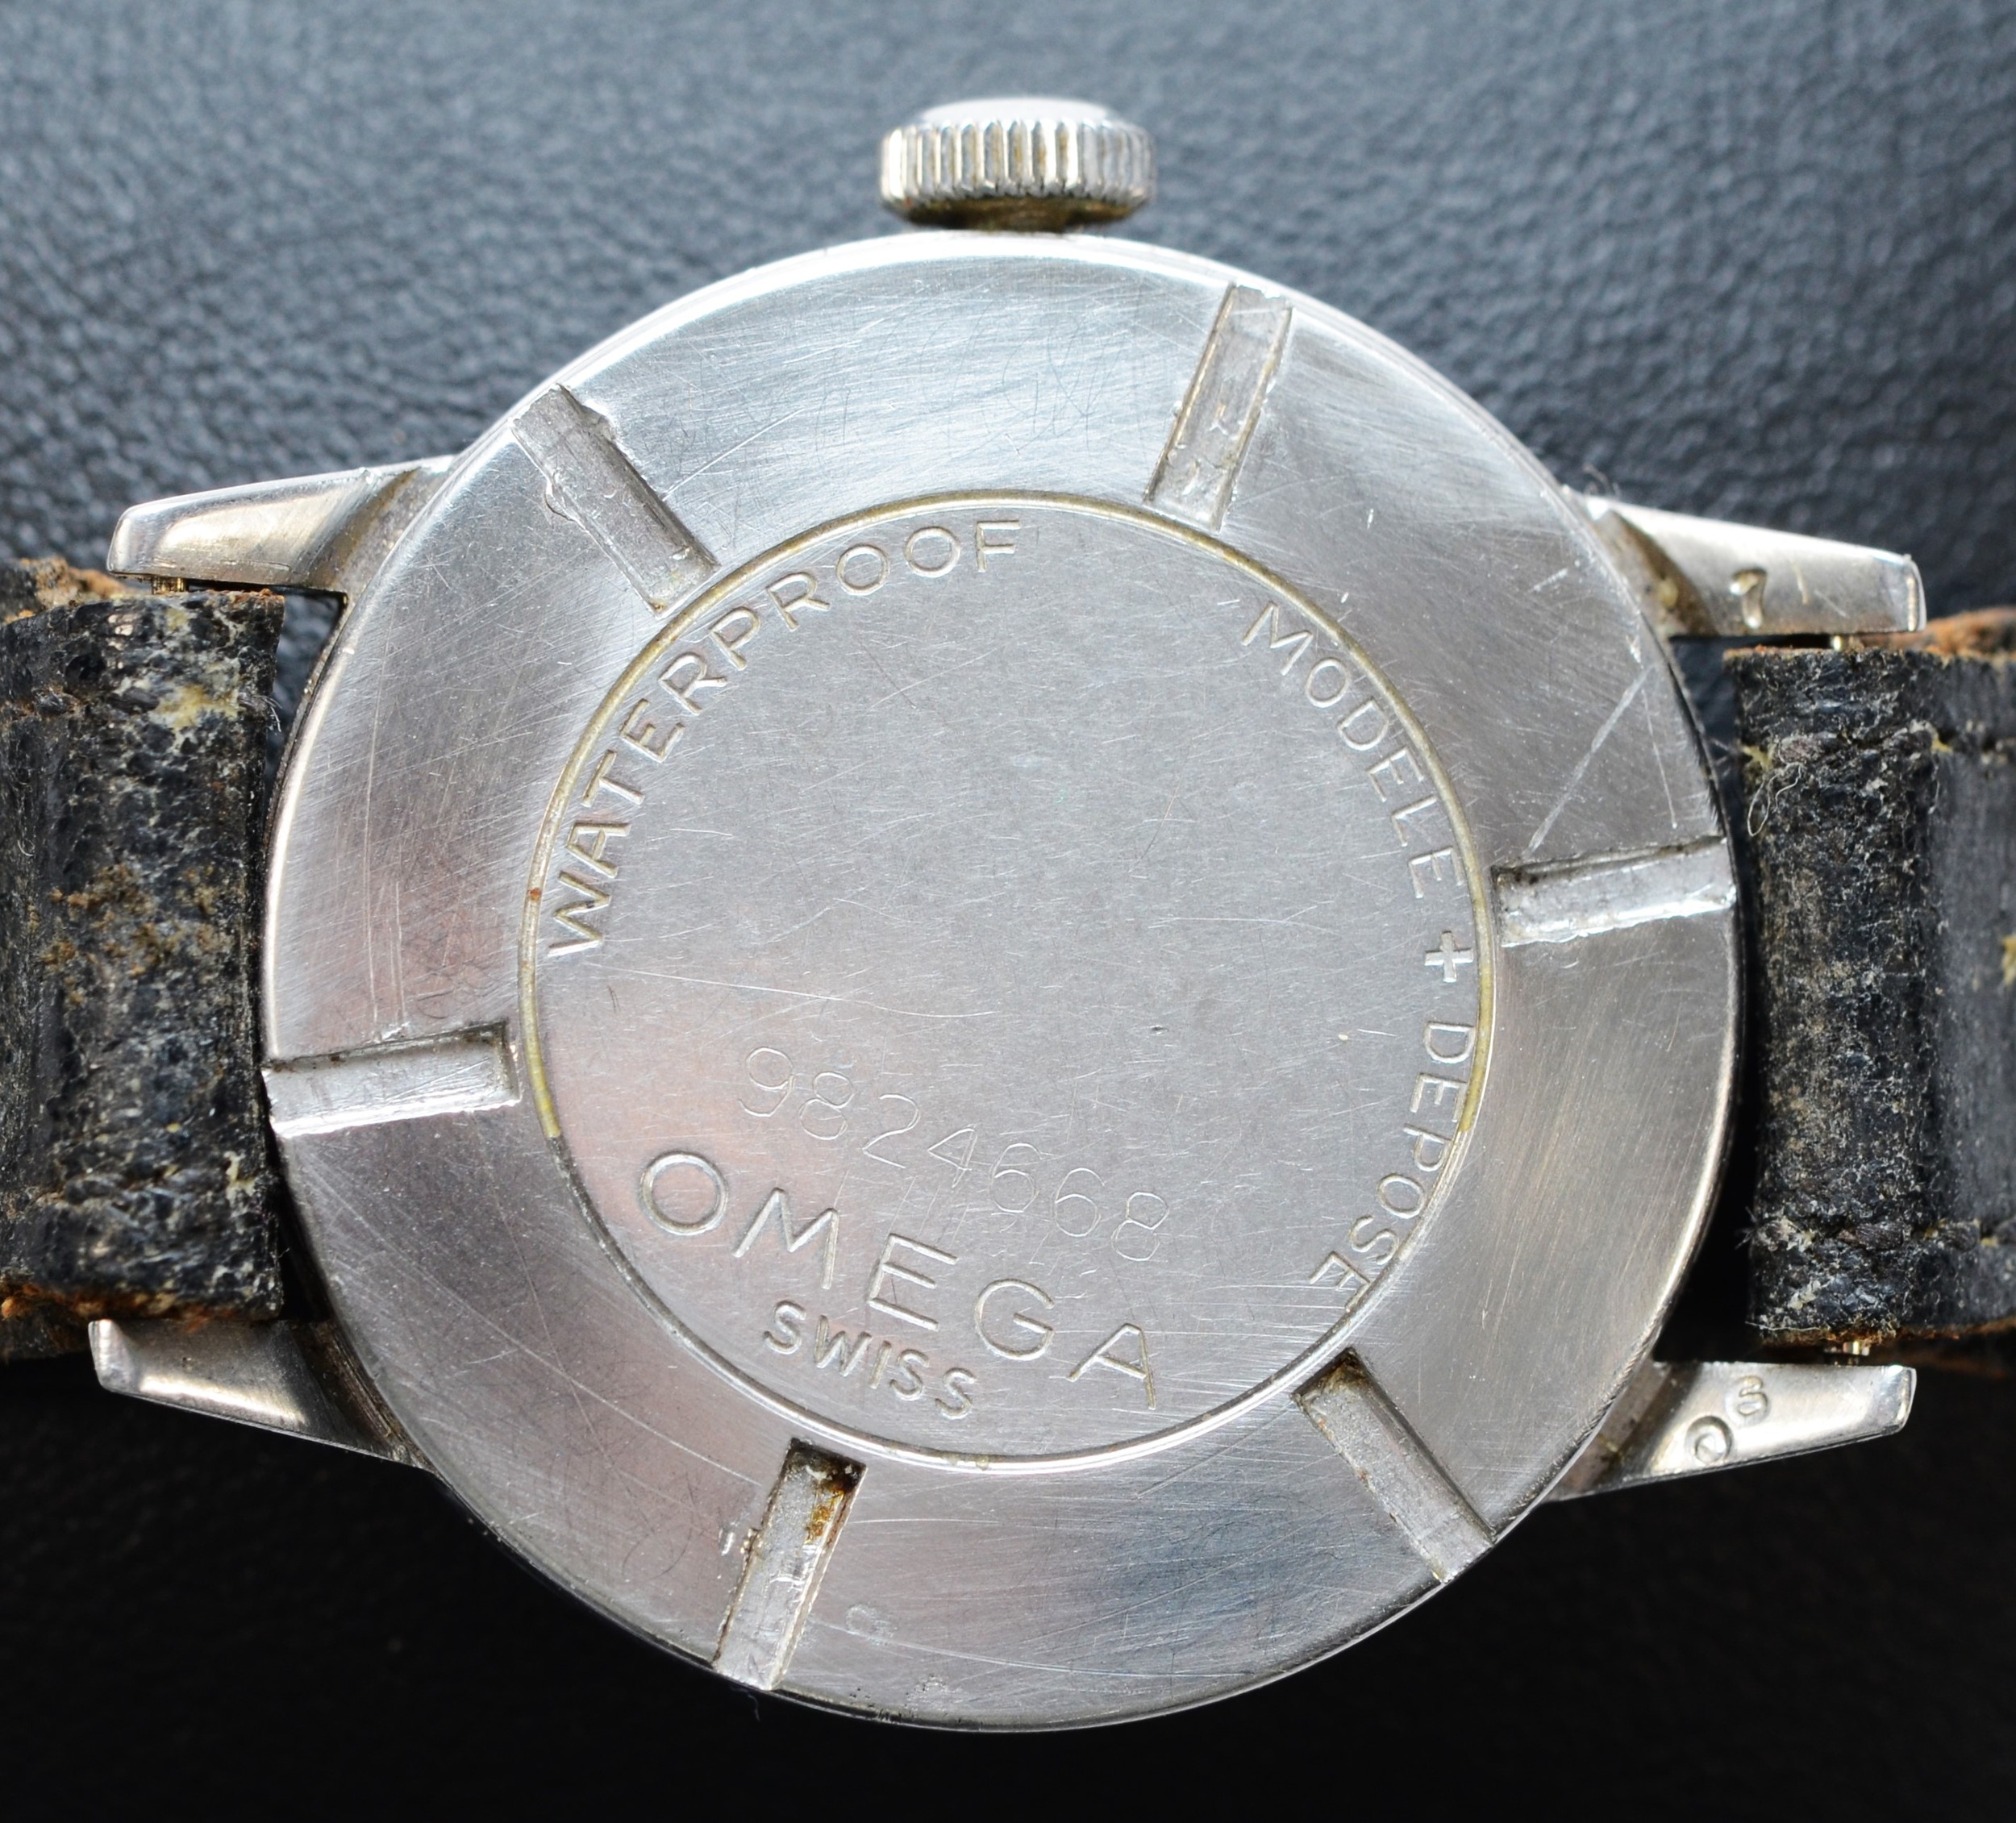 Omega WWII era stainless steel manual wind gentleman's wristwatch, c. 1939, ref 2165/1, 26.5T3 PC 15 - Image 3 of 4